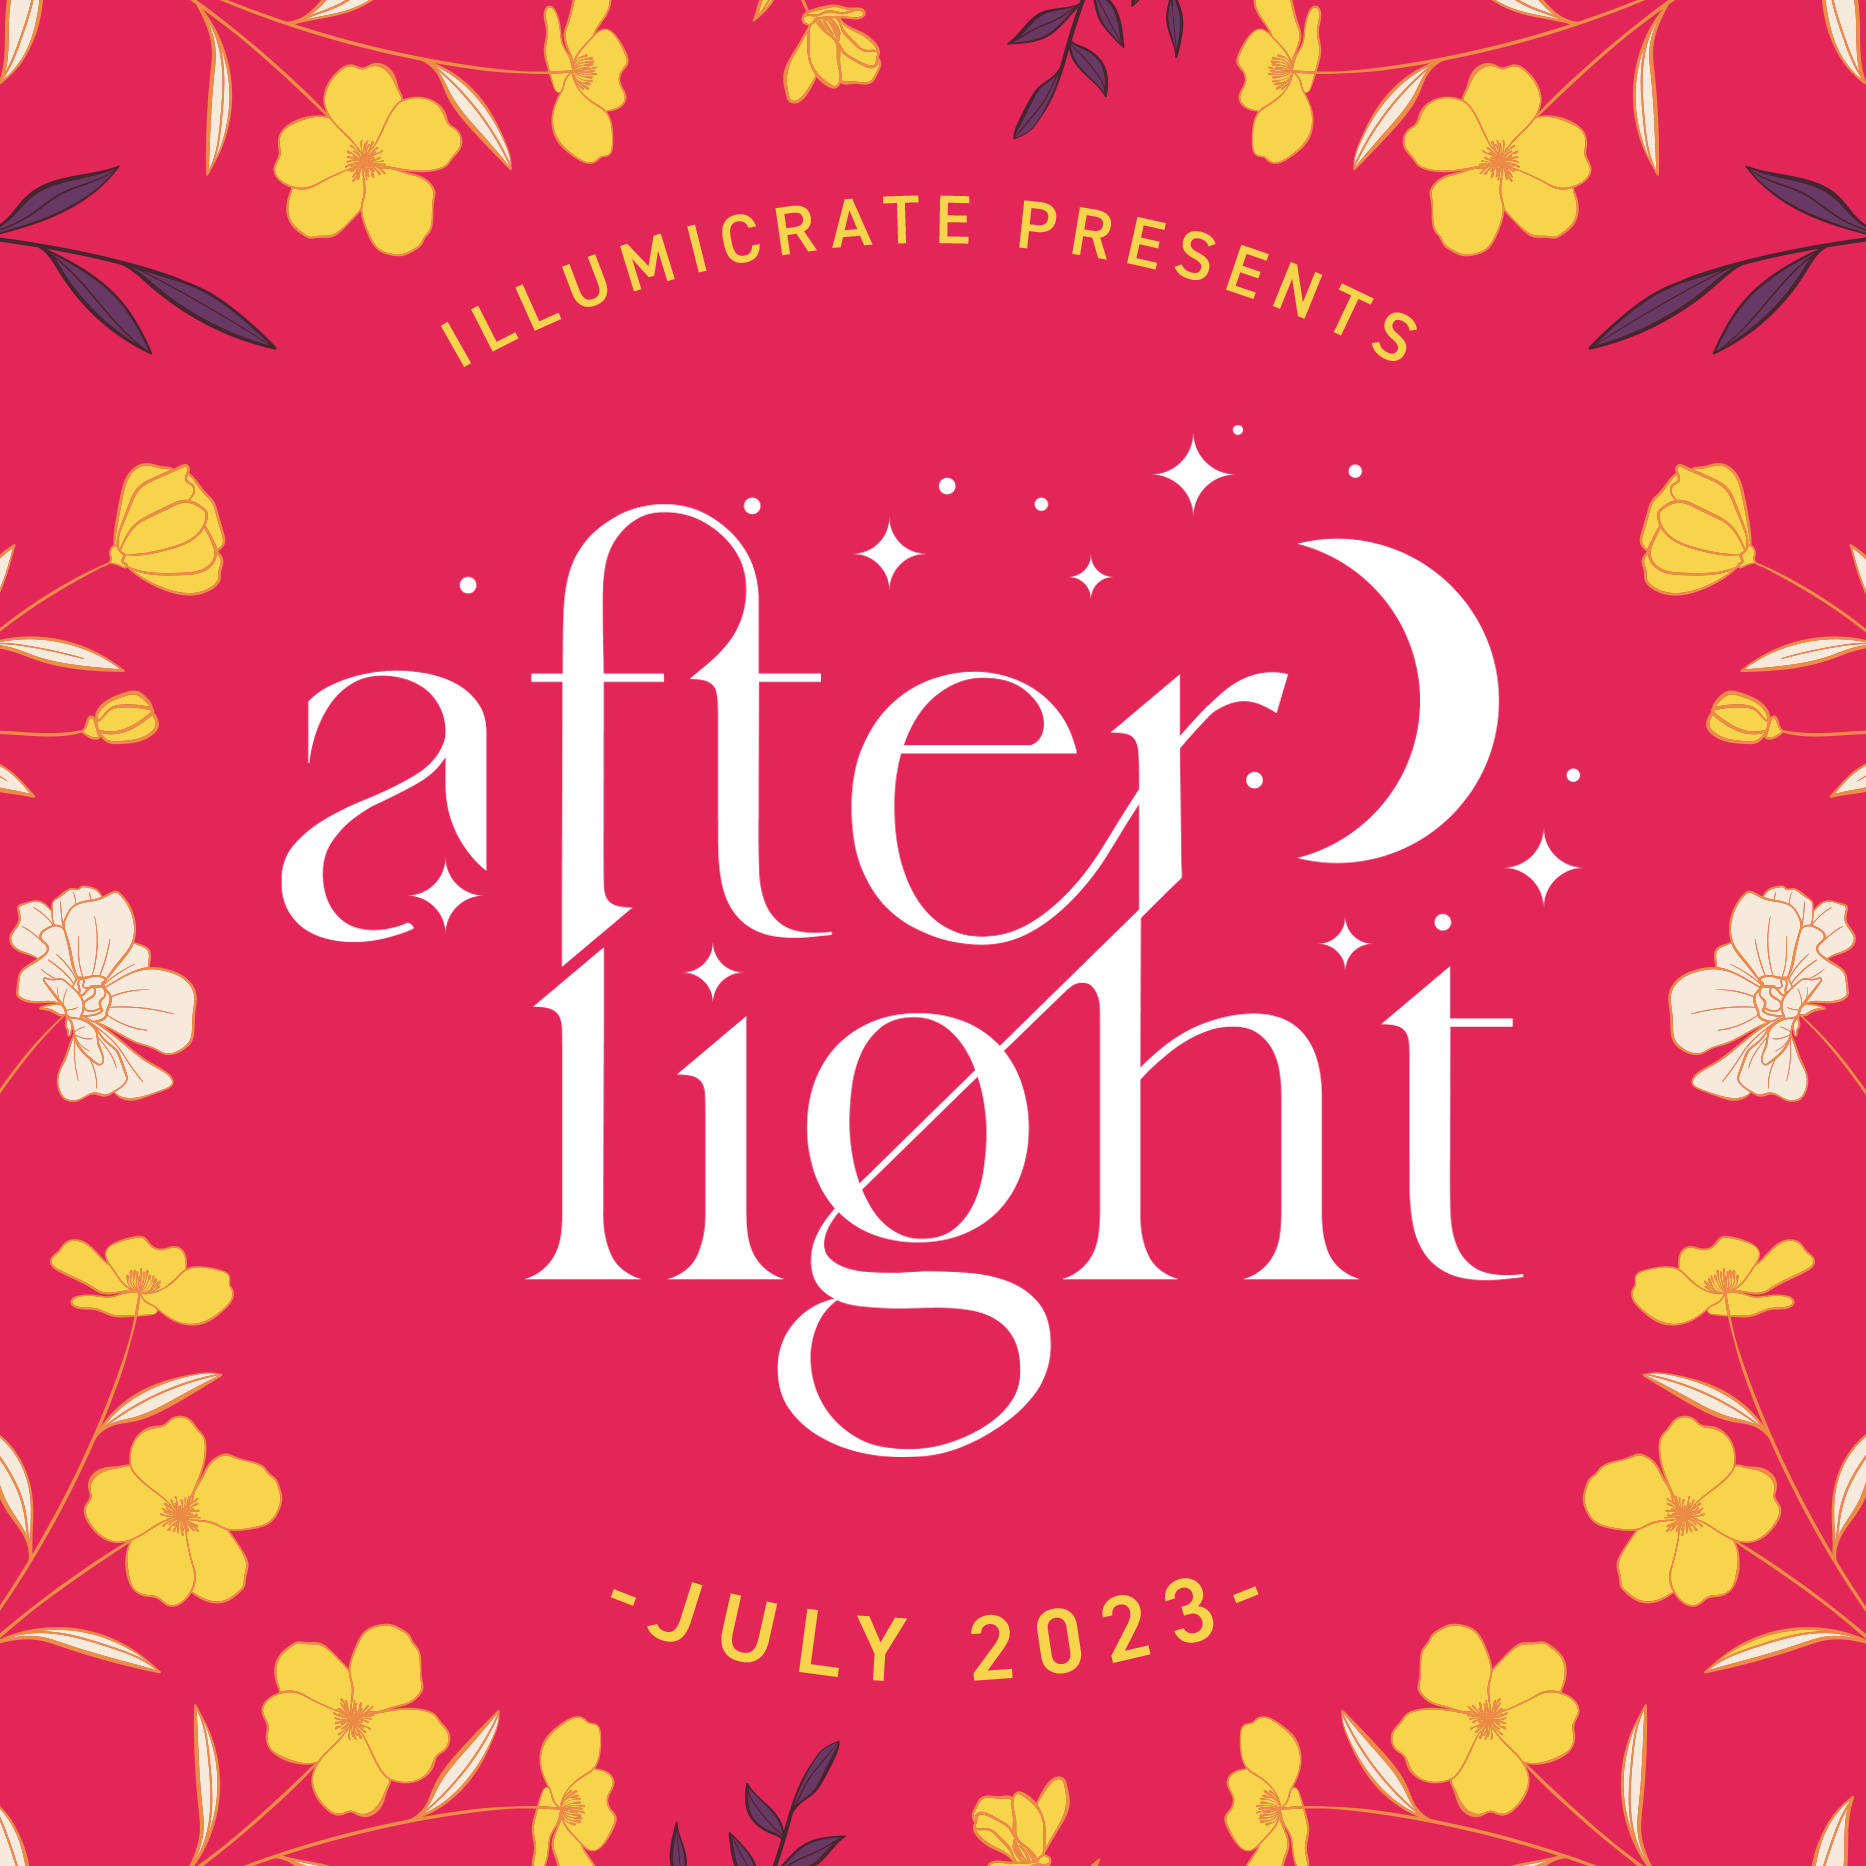 Afterlight Love Letters: Check & Mate by Ali Hazelwood - Illumicrate